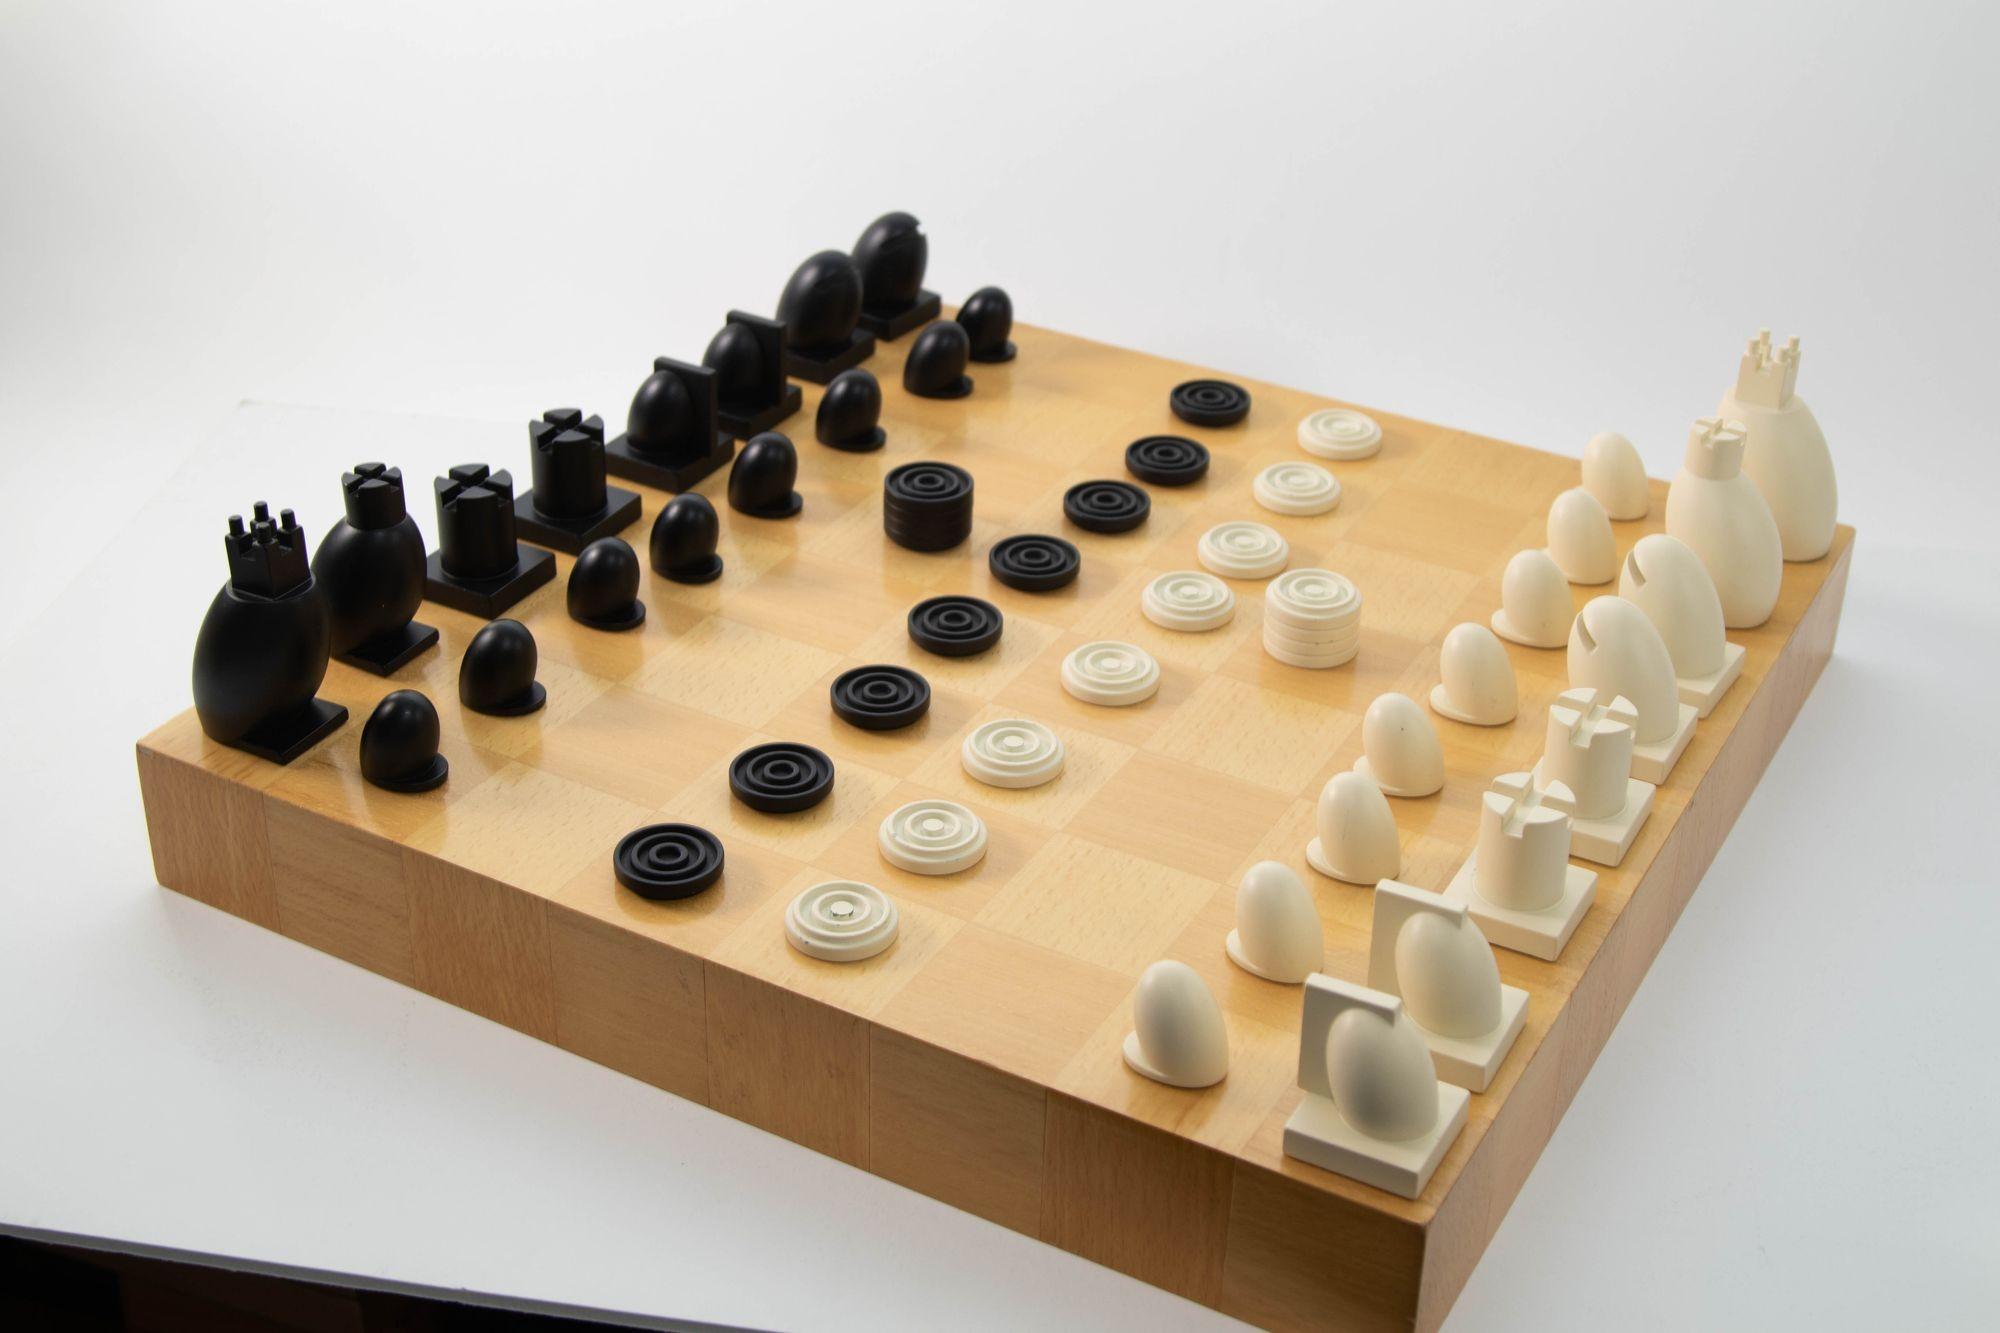 Michael Graves Postmodern Chess and Checkers Set.
Original postmodern Michael Graves chess and checkers set.
Maple wood chess and checkers set with board and box by famed architect Michael Graves.
Michael Graves was a Memphis Group designer and a